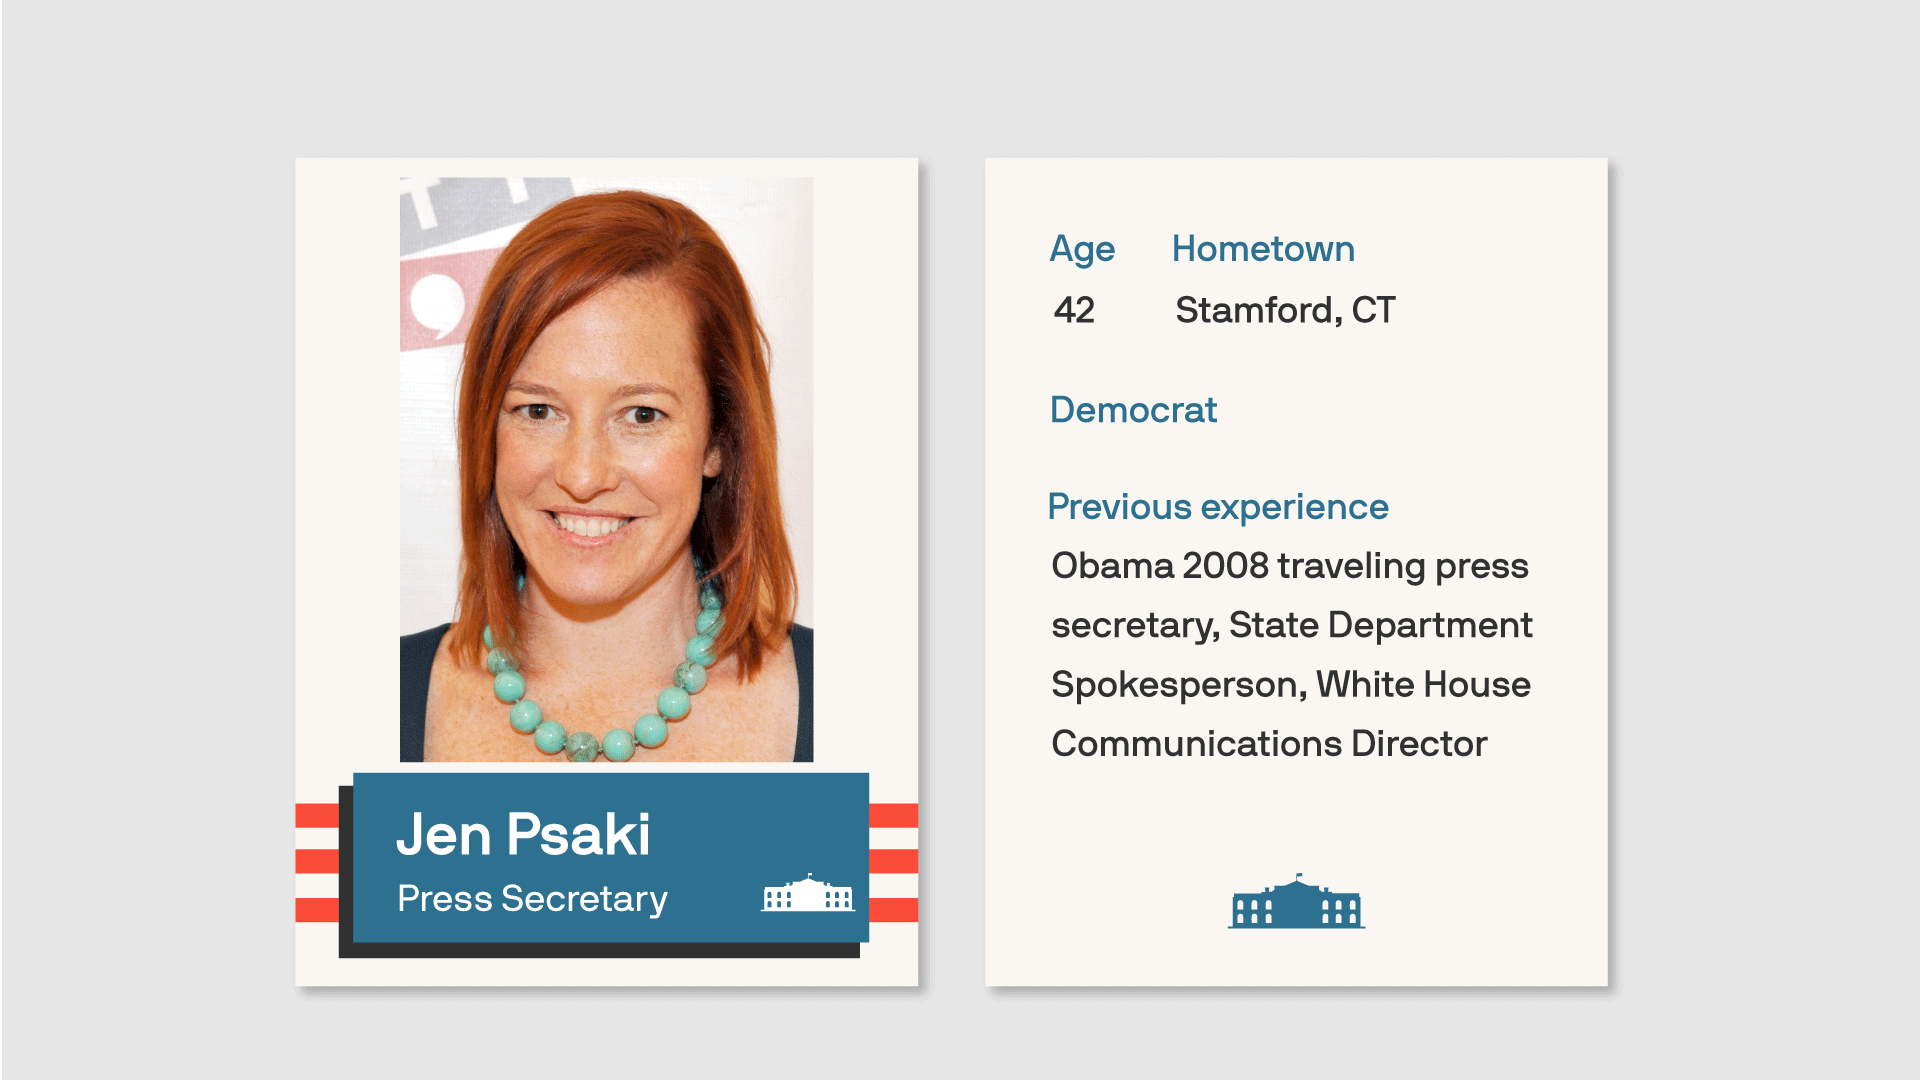 A baseball card graphic shows the face and vital statistics for incoming White House press secretary Jen Psaki.